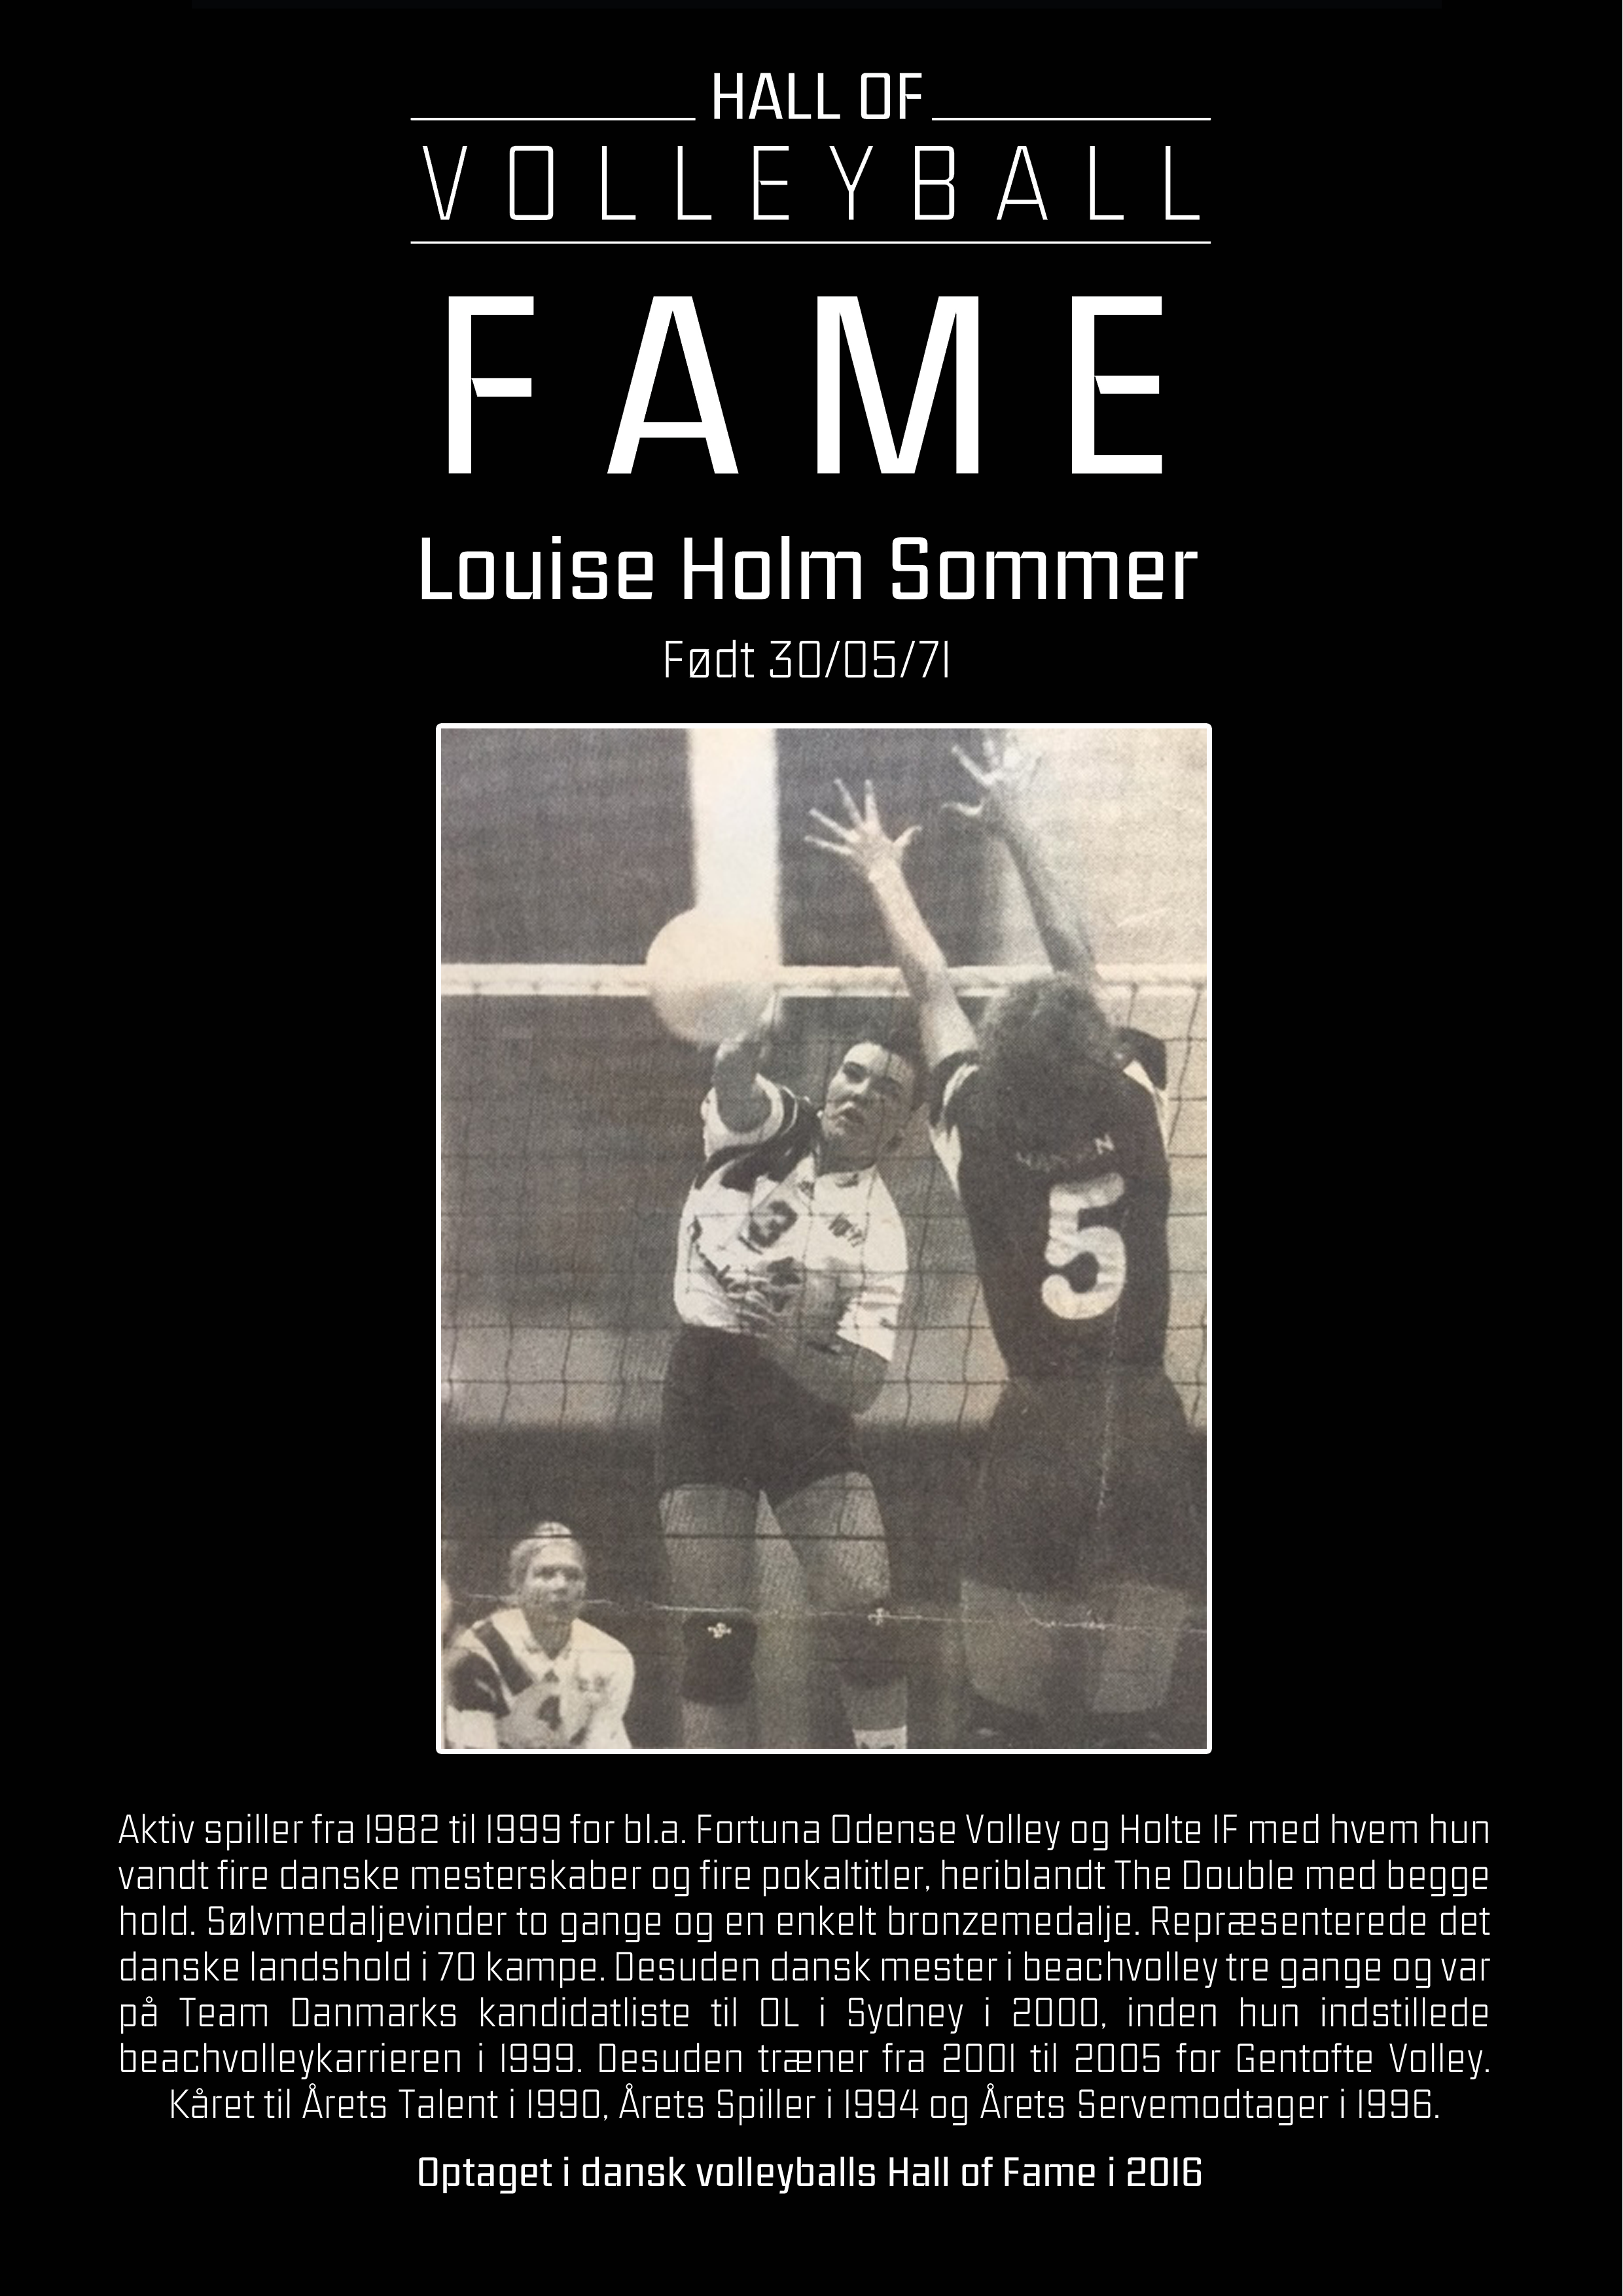 Louise Holm Sommer